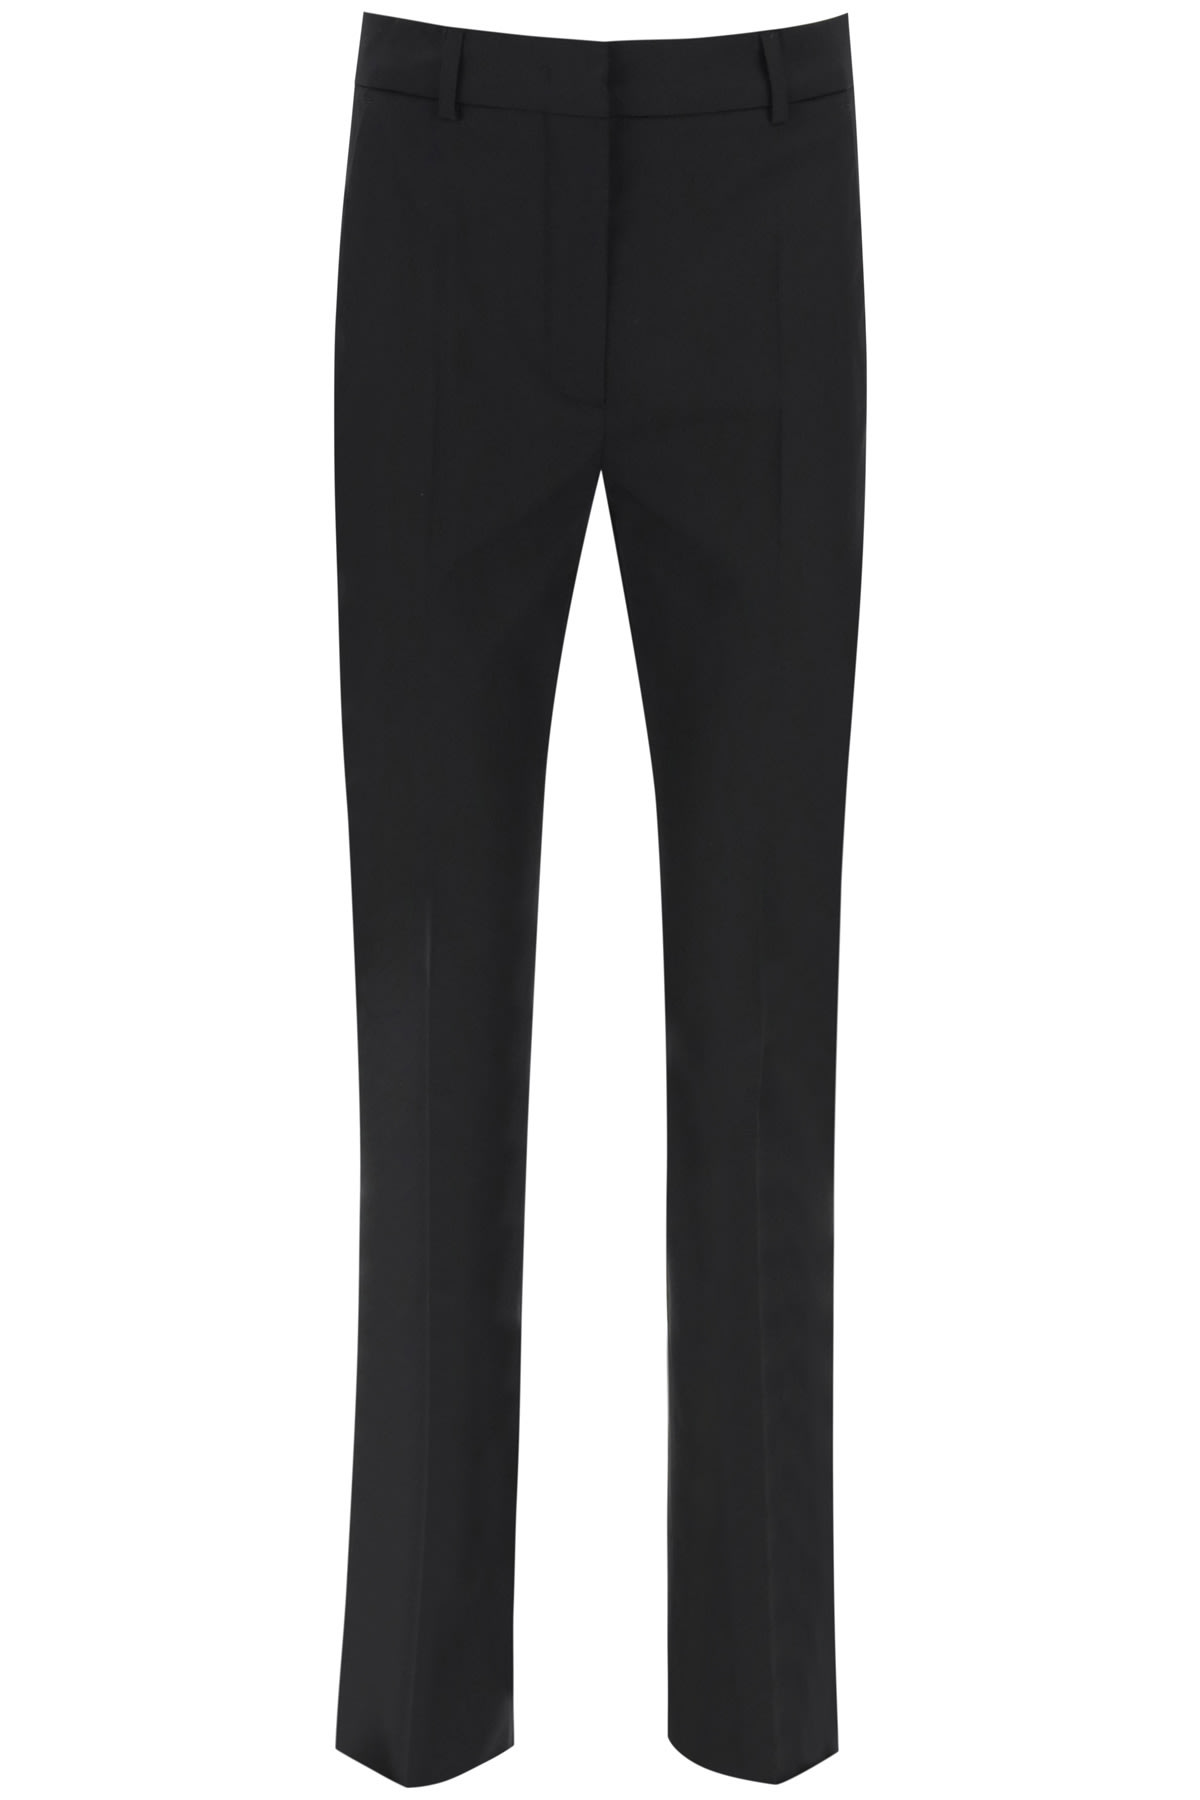 SportMax Cotton Tailored Trousers